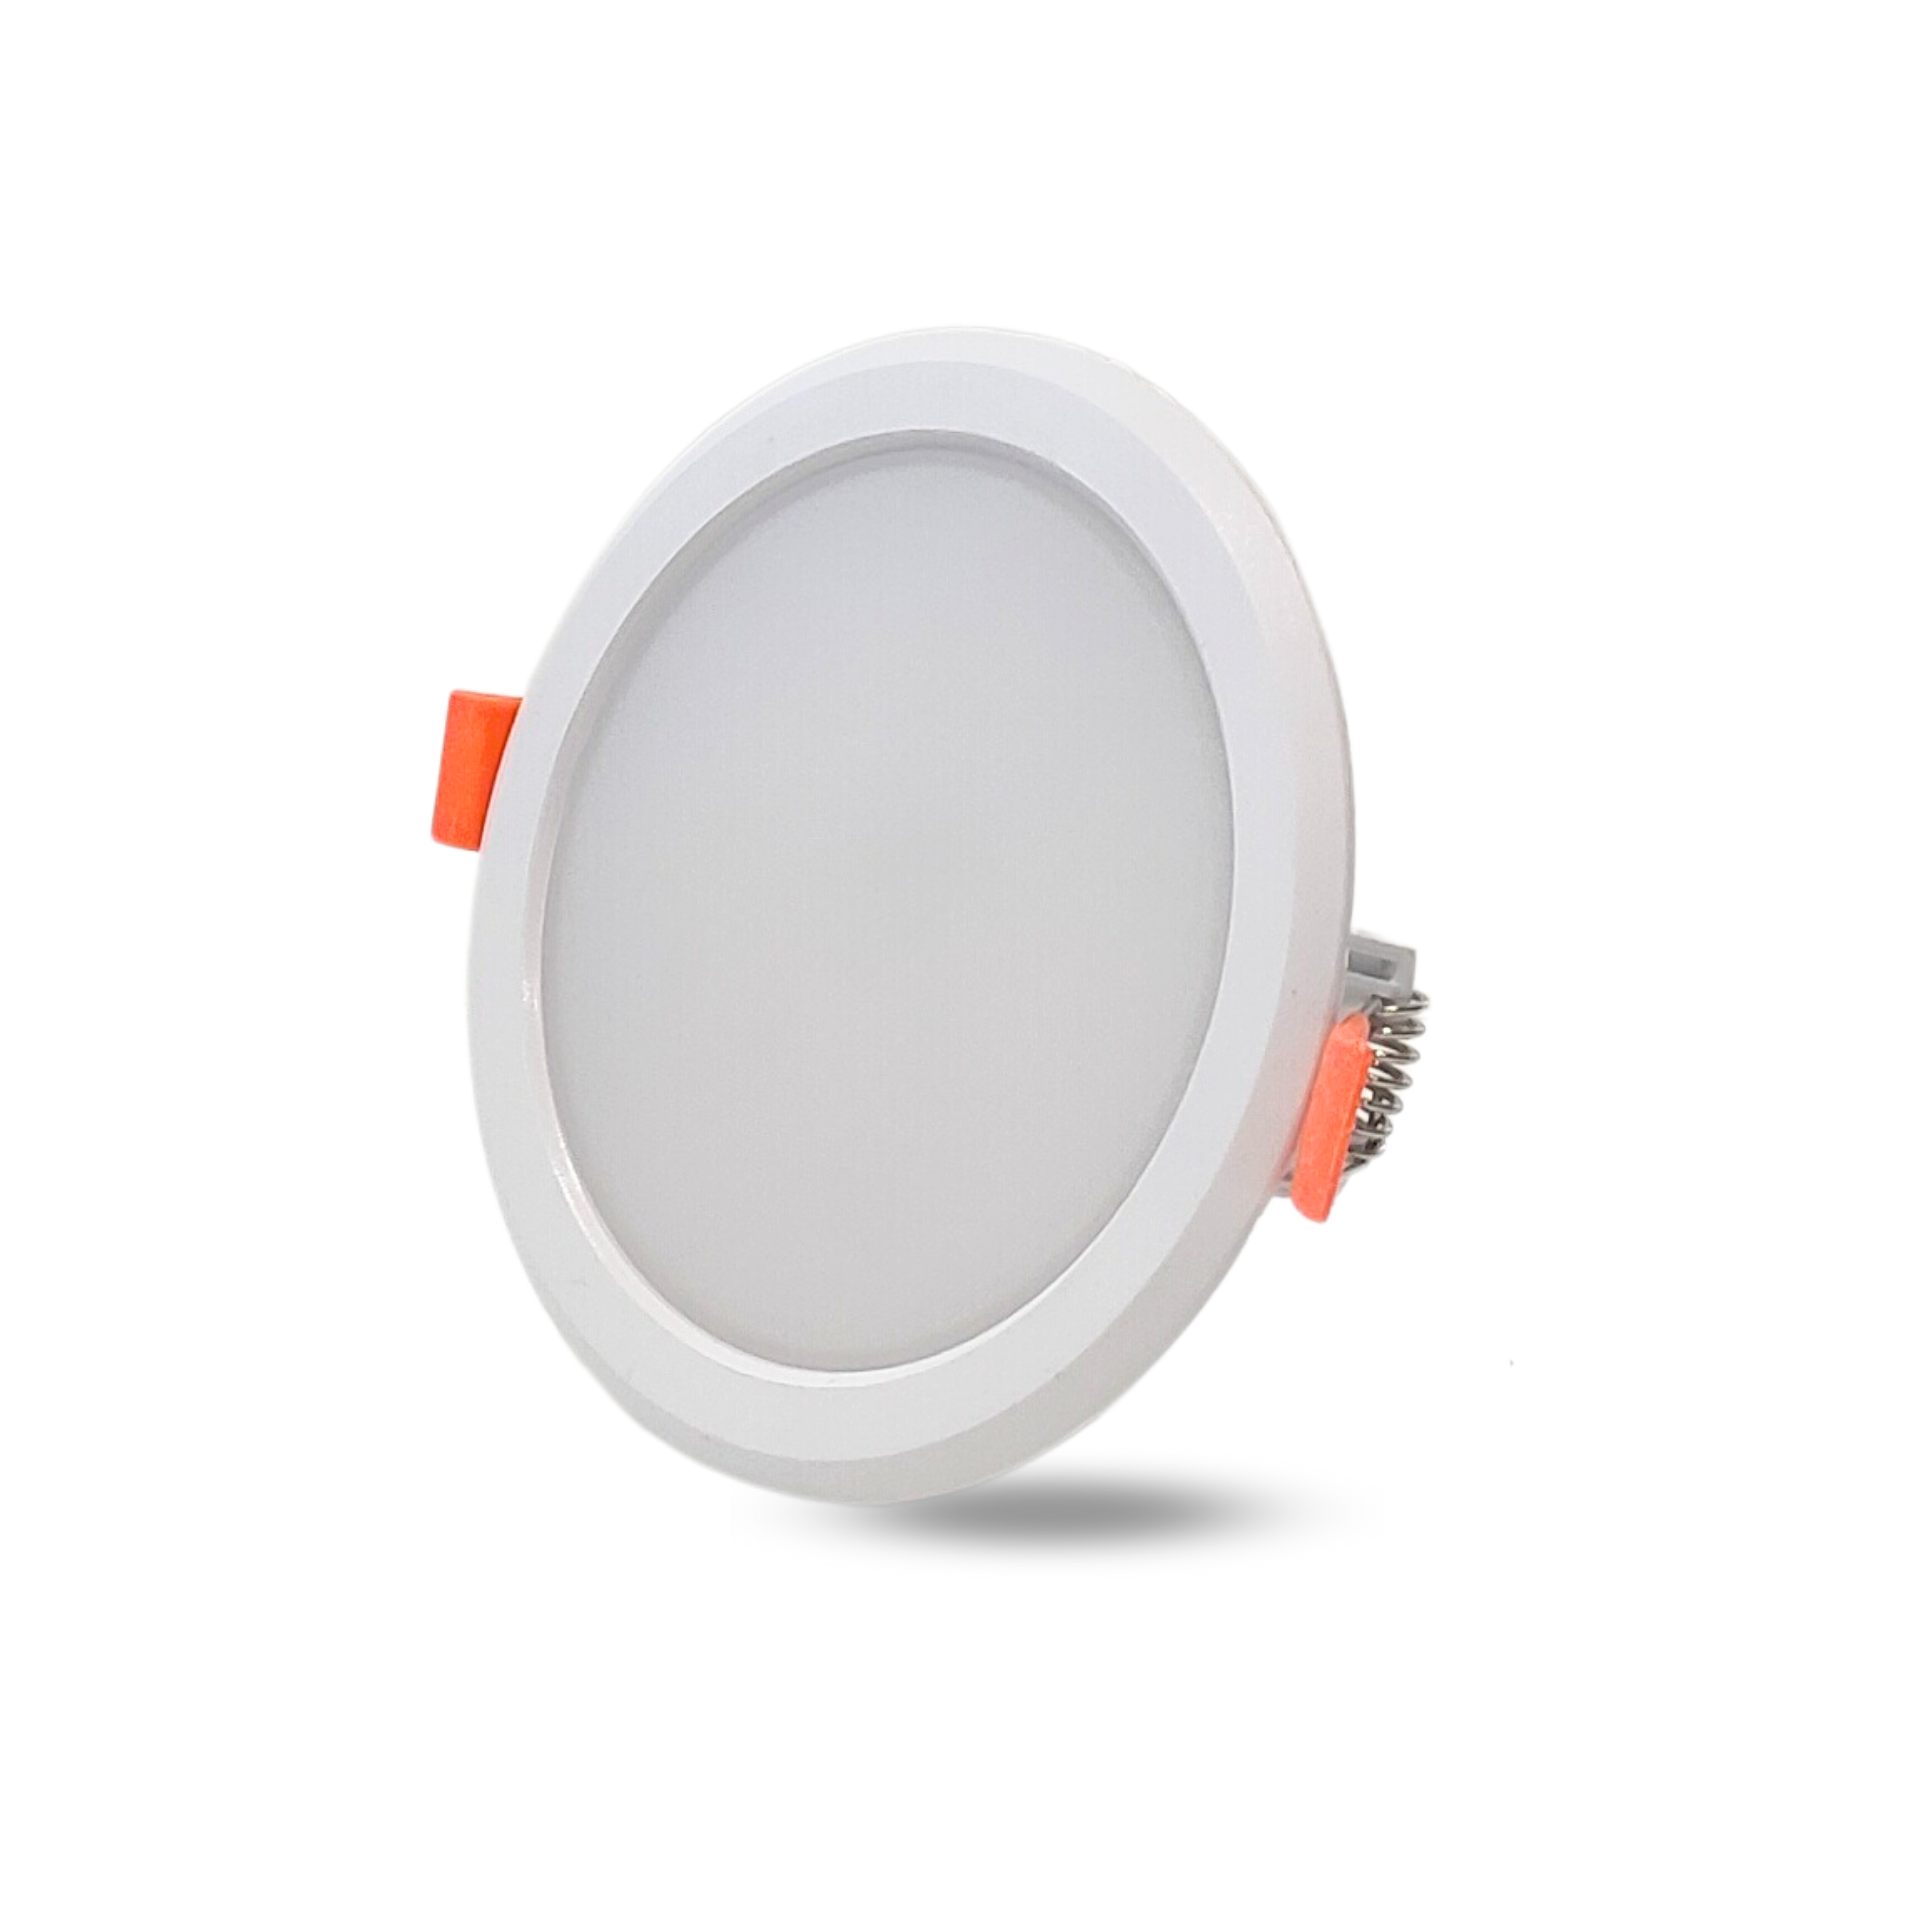 8 Watt LED Conceal PC (Poly Carbonate) Panel Light For POP / Recessed Lighting